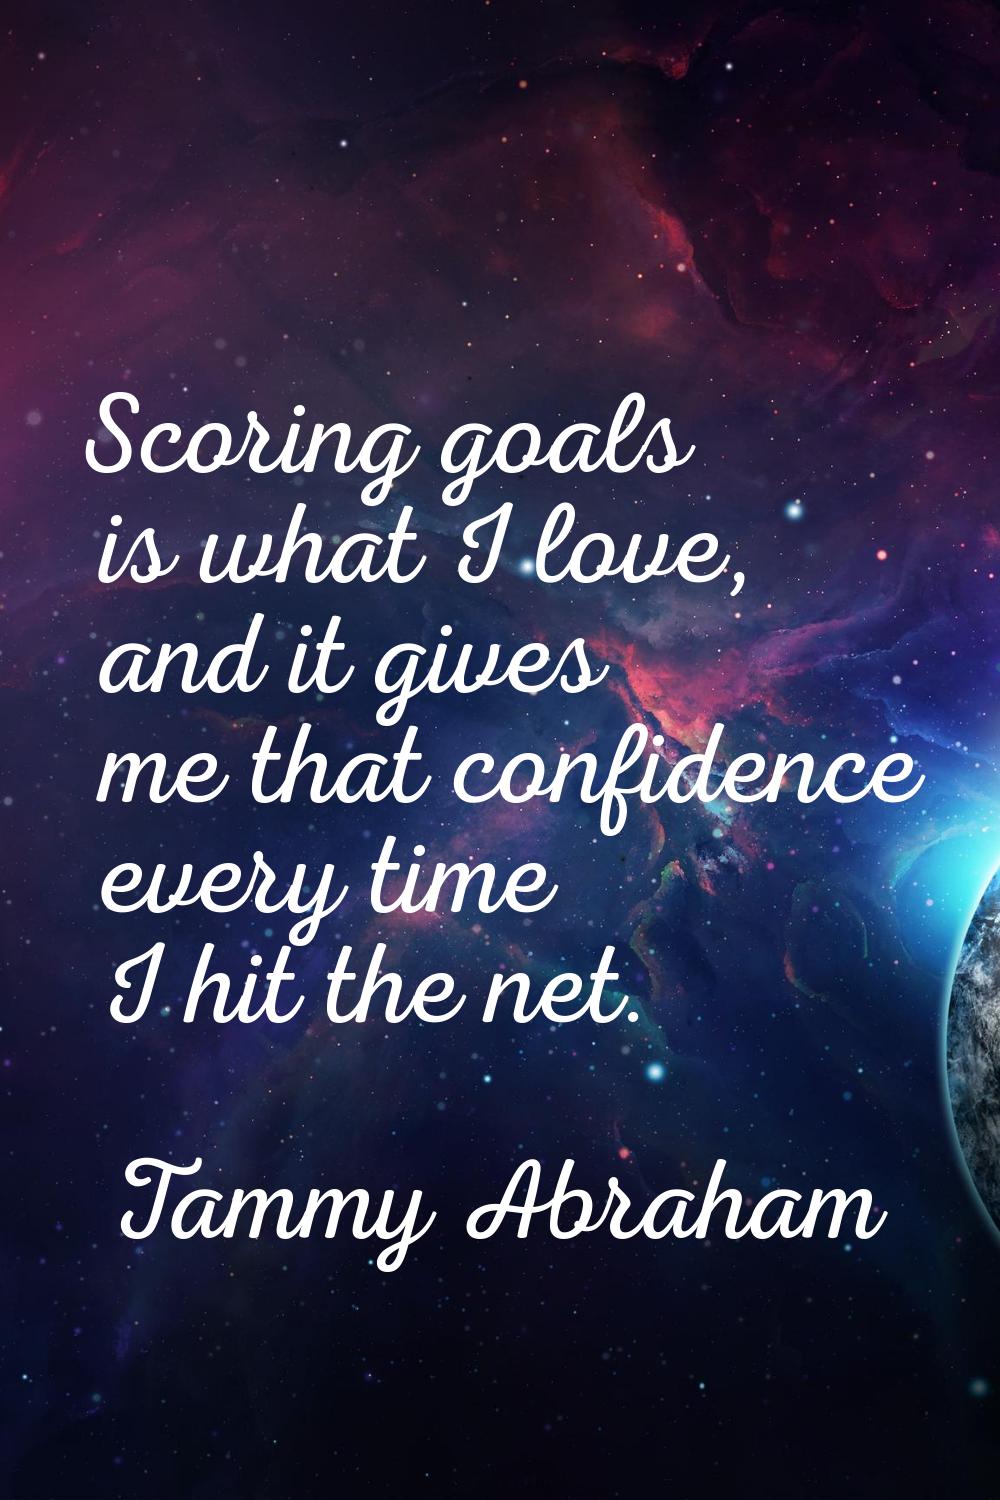 Scoring goals is what I love, and it gives me that confidence every time I hit the net.